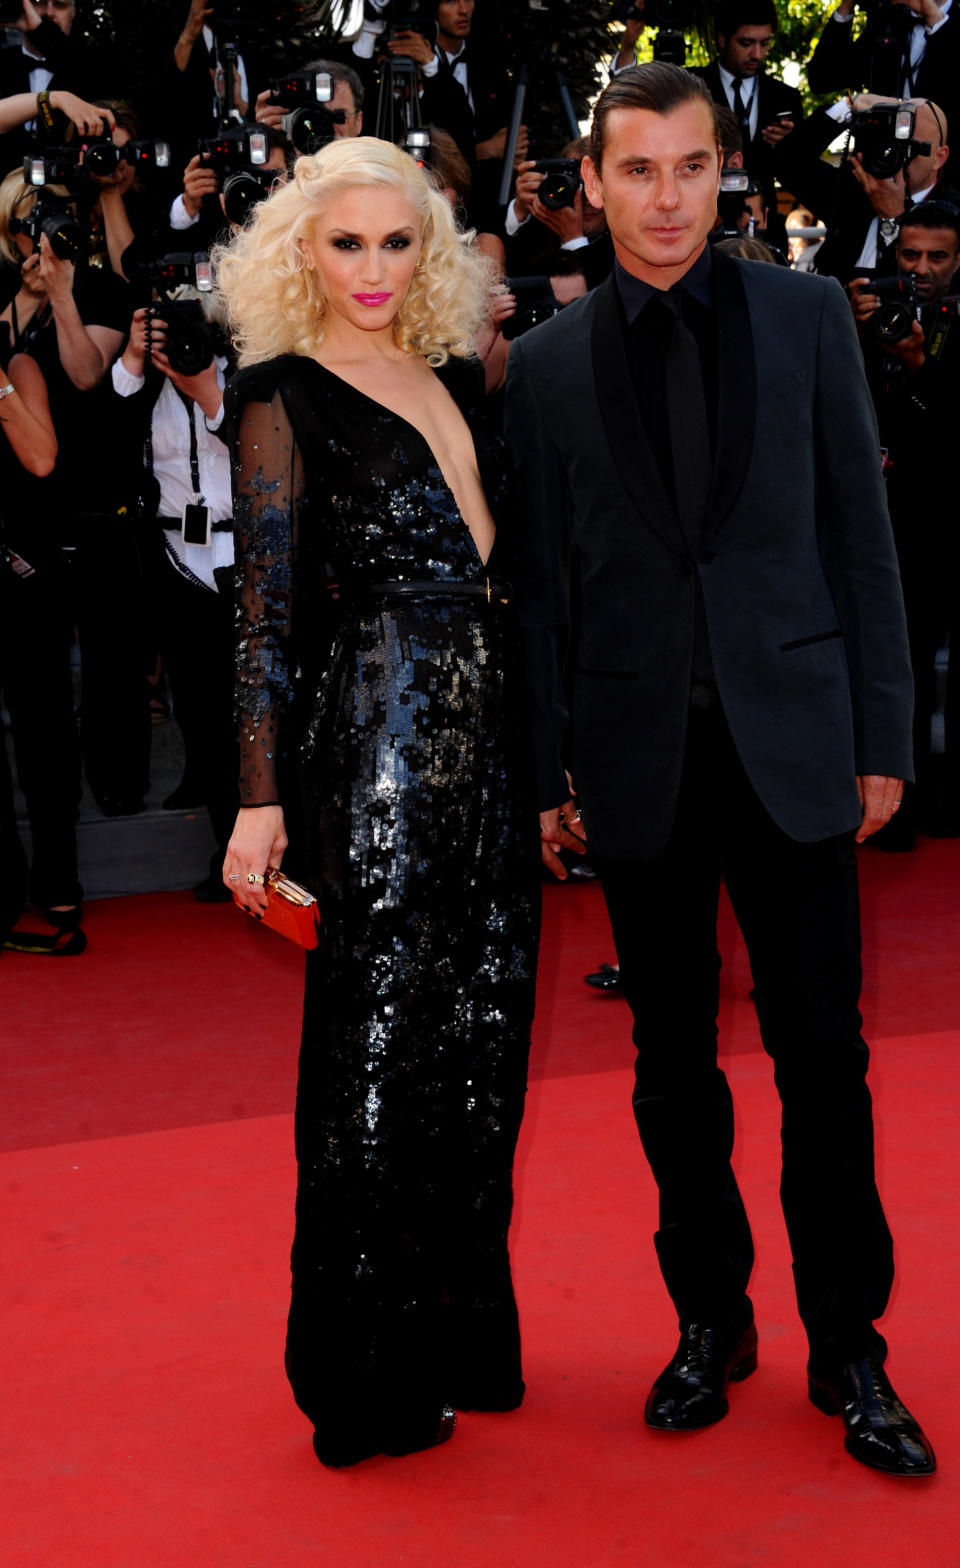 CANNES-May 16: Gavin Rossdale and Gwen Stefani
attend 'The Tree Of Life' premiere at the Palais des Festivals during the 64th Cannes Film Festival on May 14, 2011 in Cannes, France. (Photo by Anthony Harvey/Getty Images)